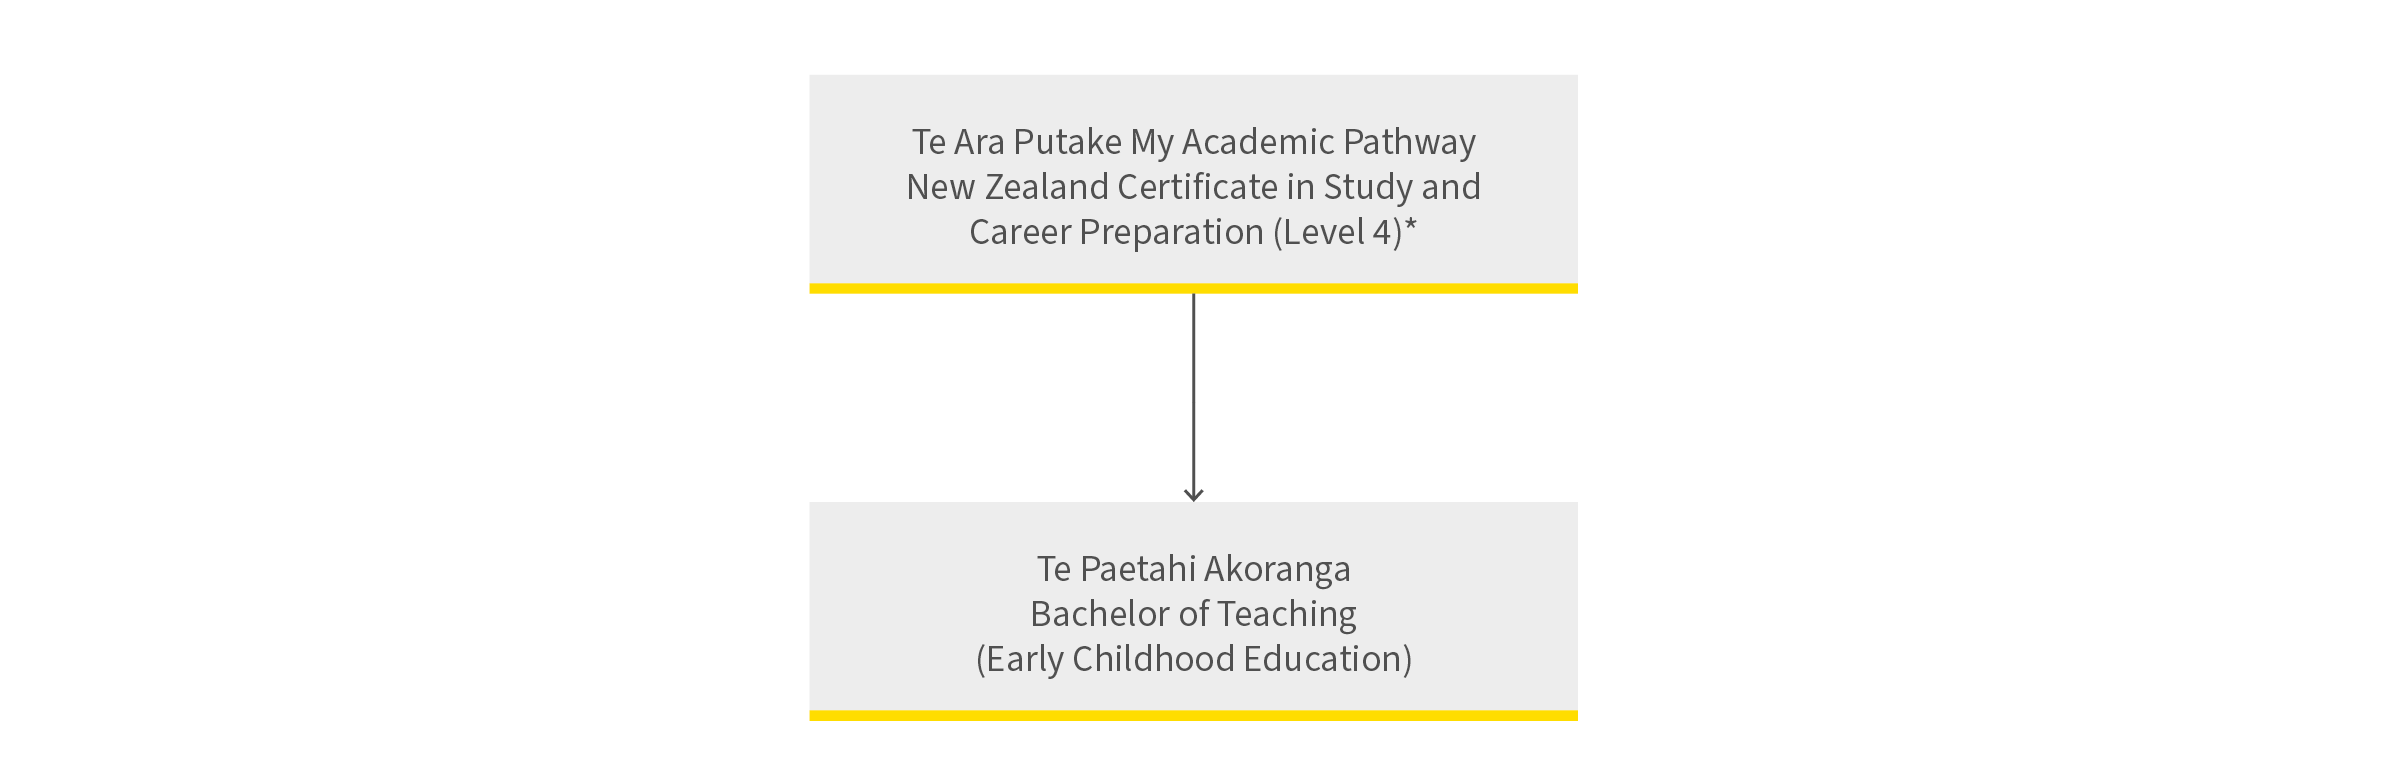 Early childhood education pathway diagram